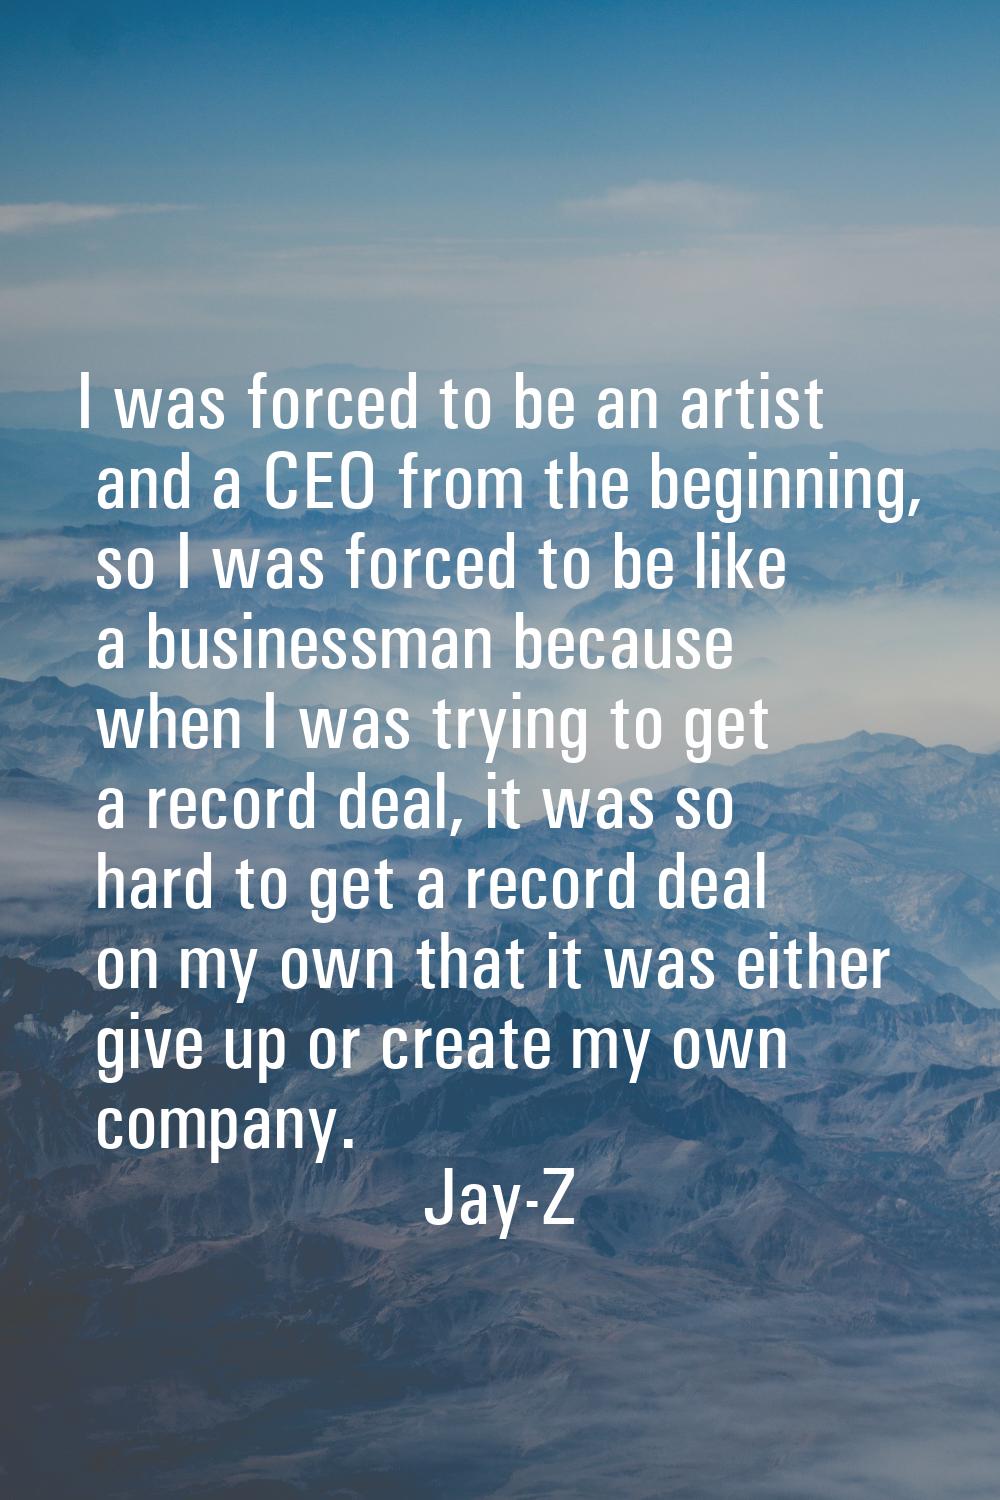 I was forced to be an artist and a CEO from the beginning, so I was forced to be like a businessman